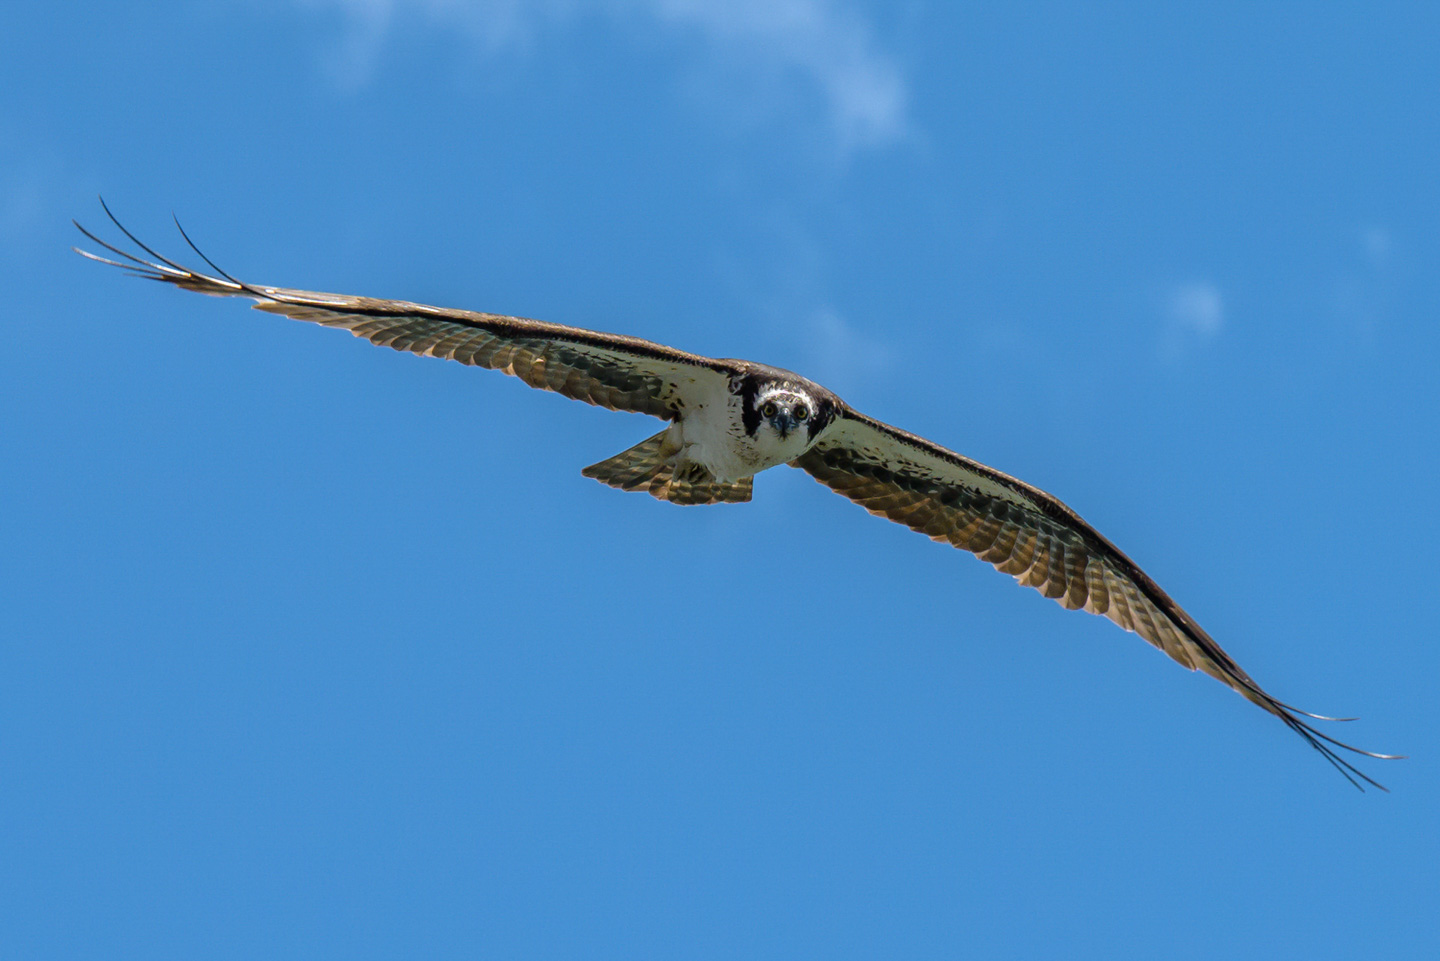 Osprey looking directly at the camera